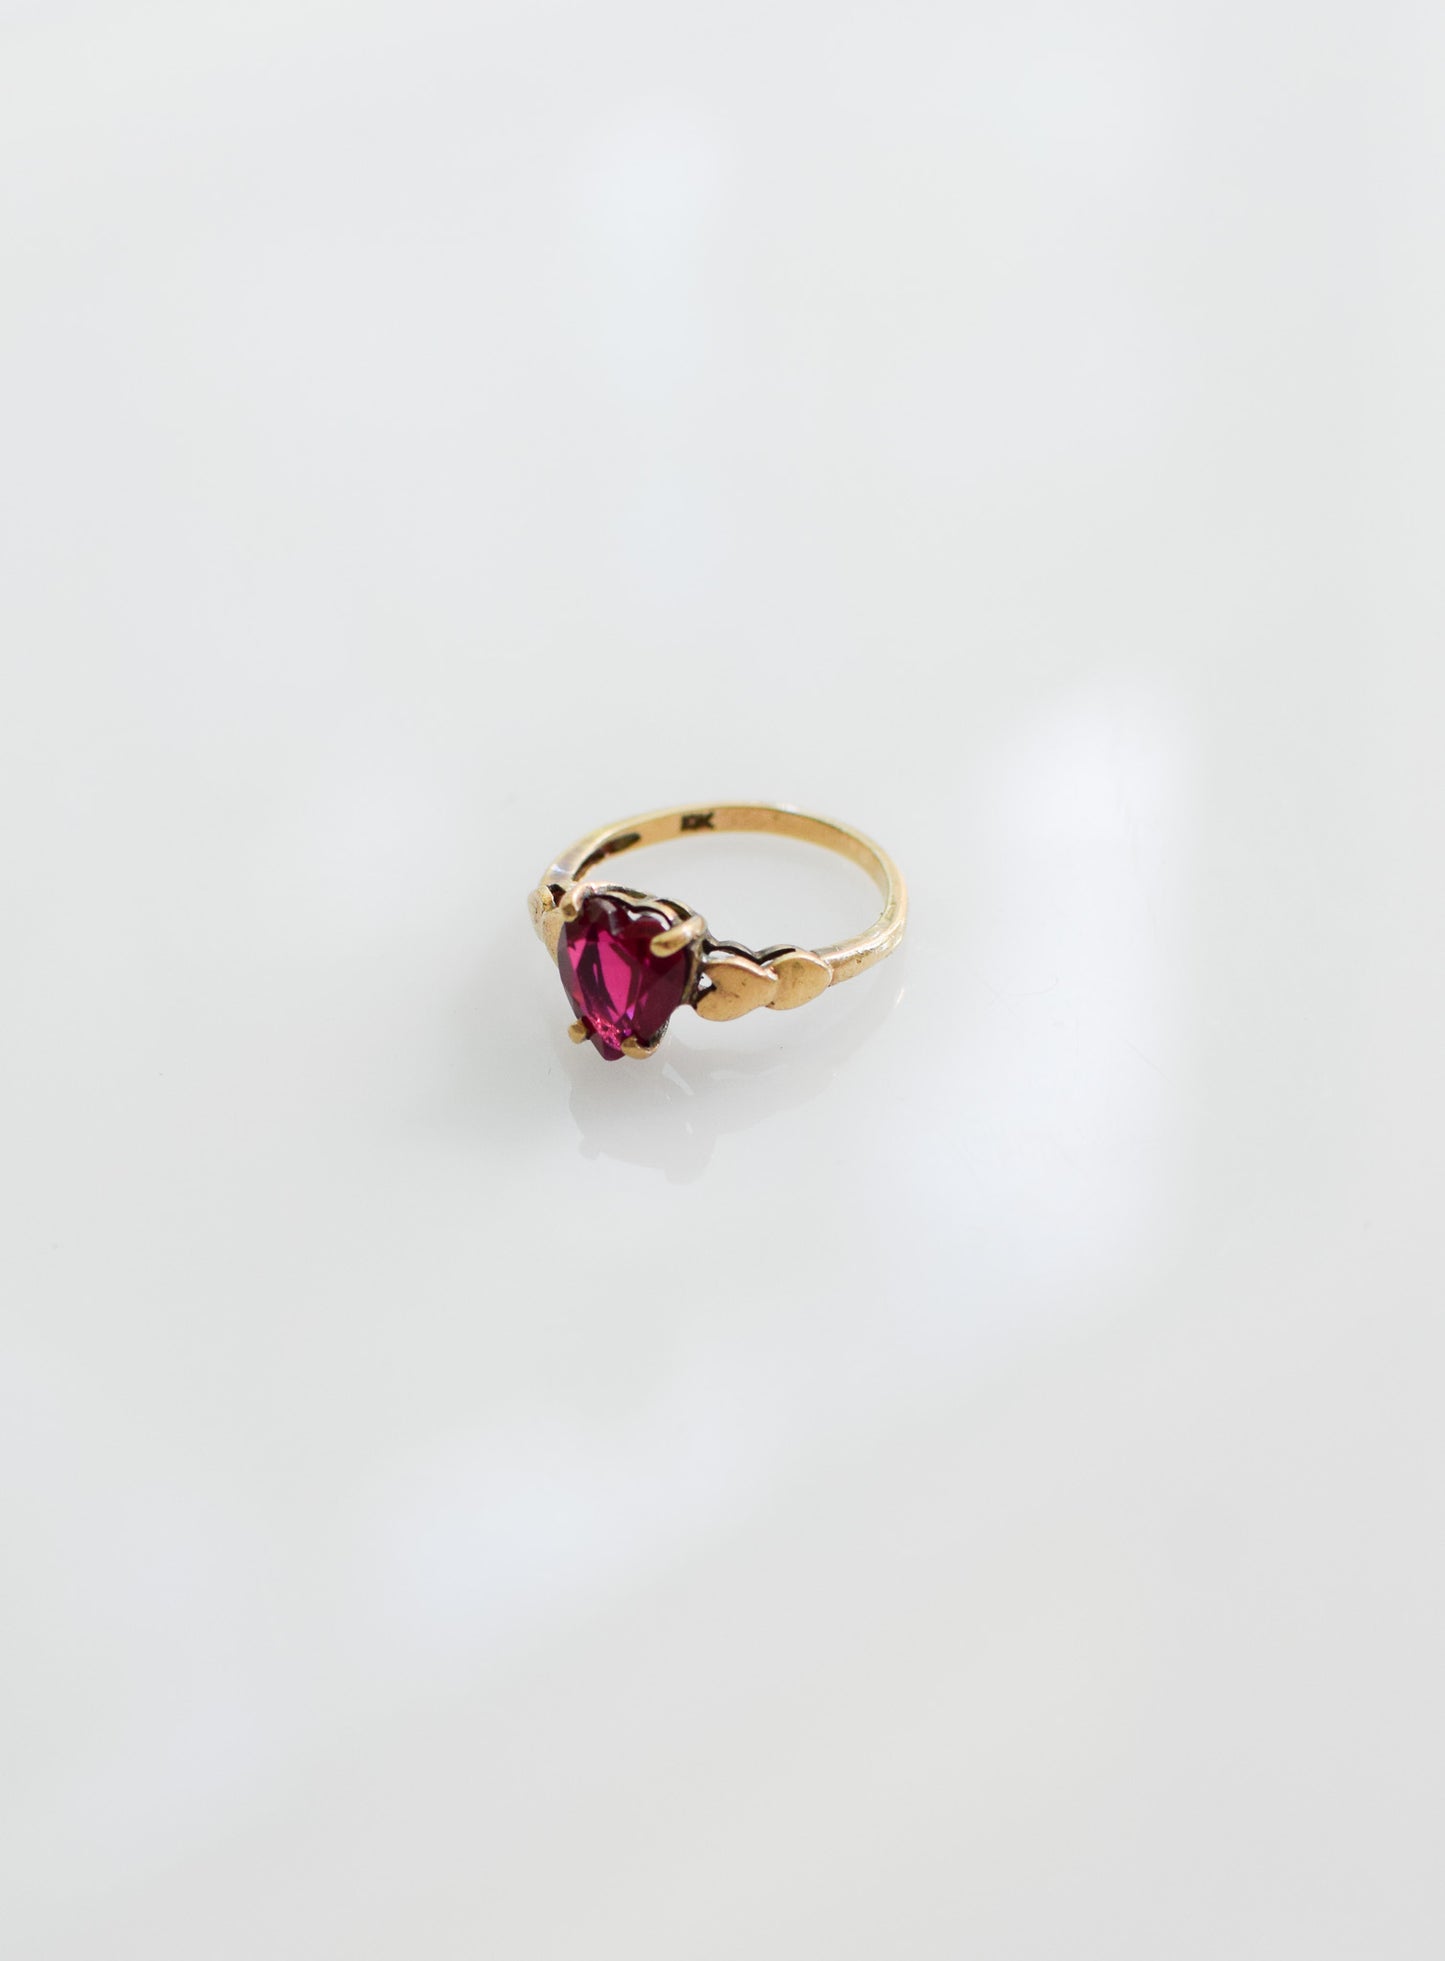 Vintage 10 KT Gold and Ruby Heart Ring | US 4.5